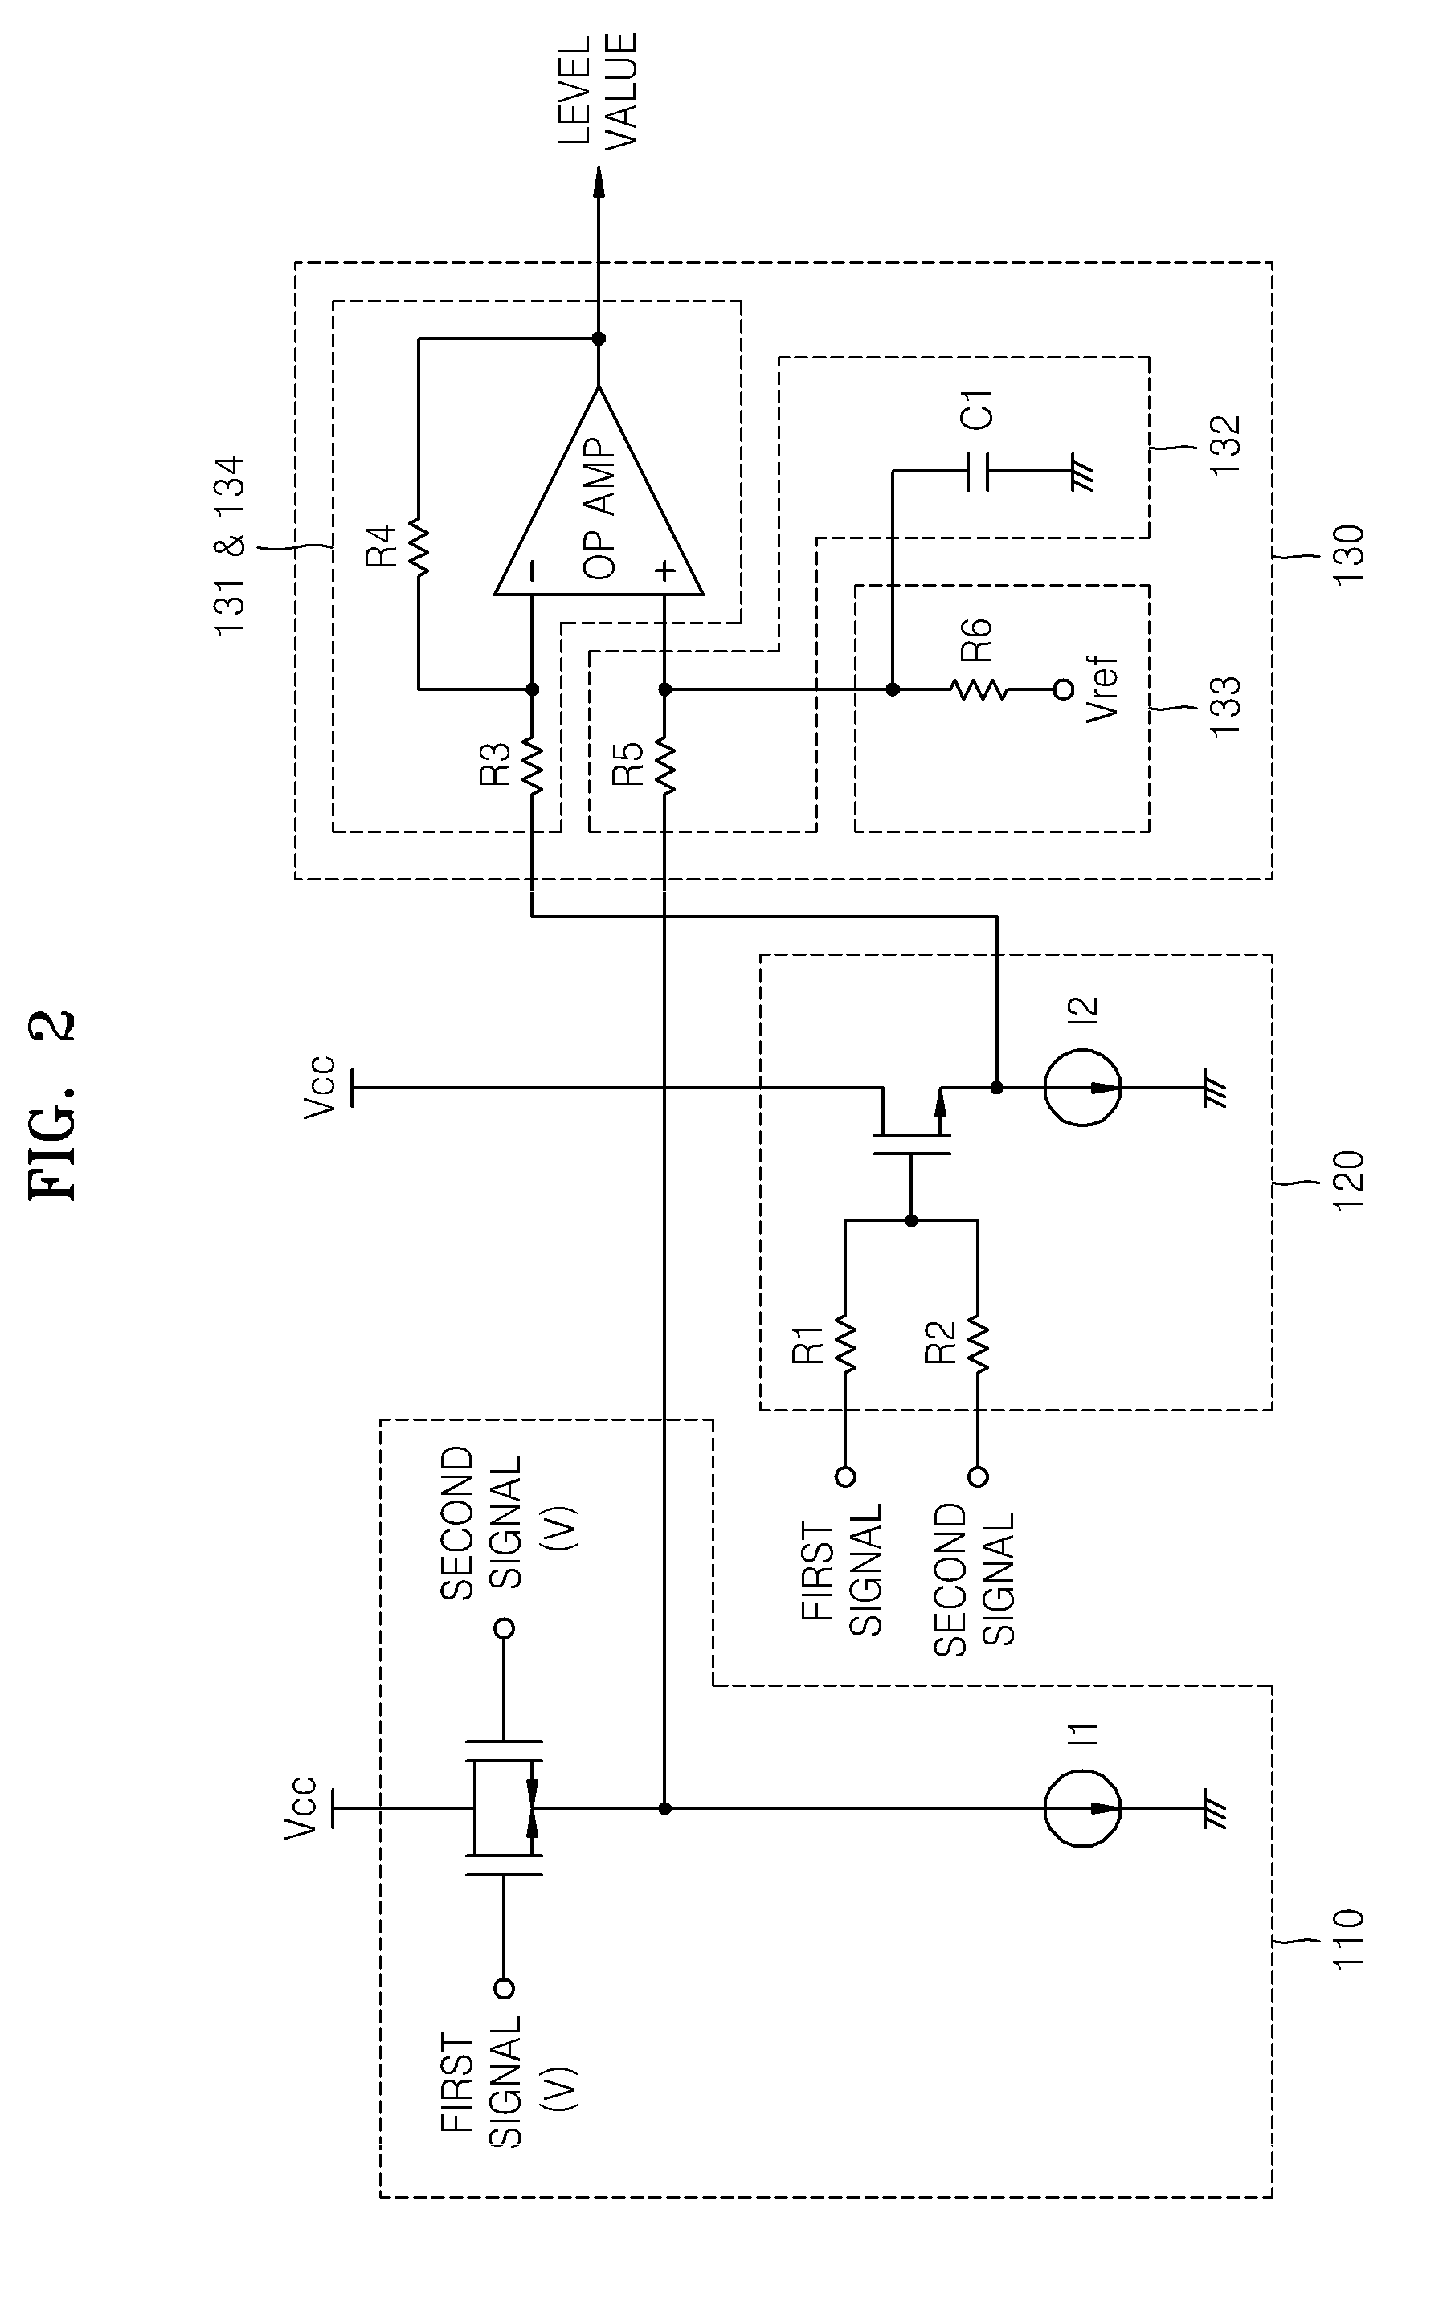 Input signal level detection apparatus and method